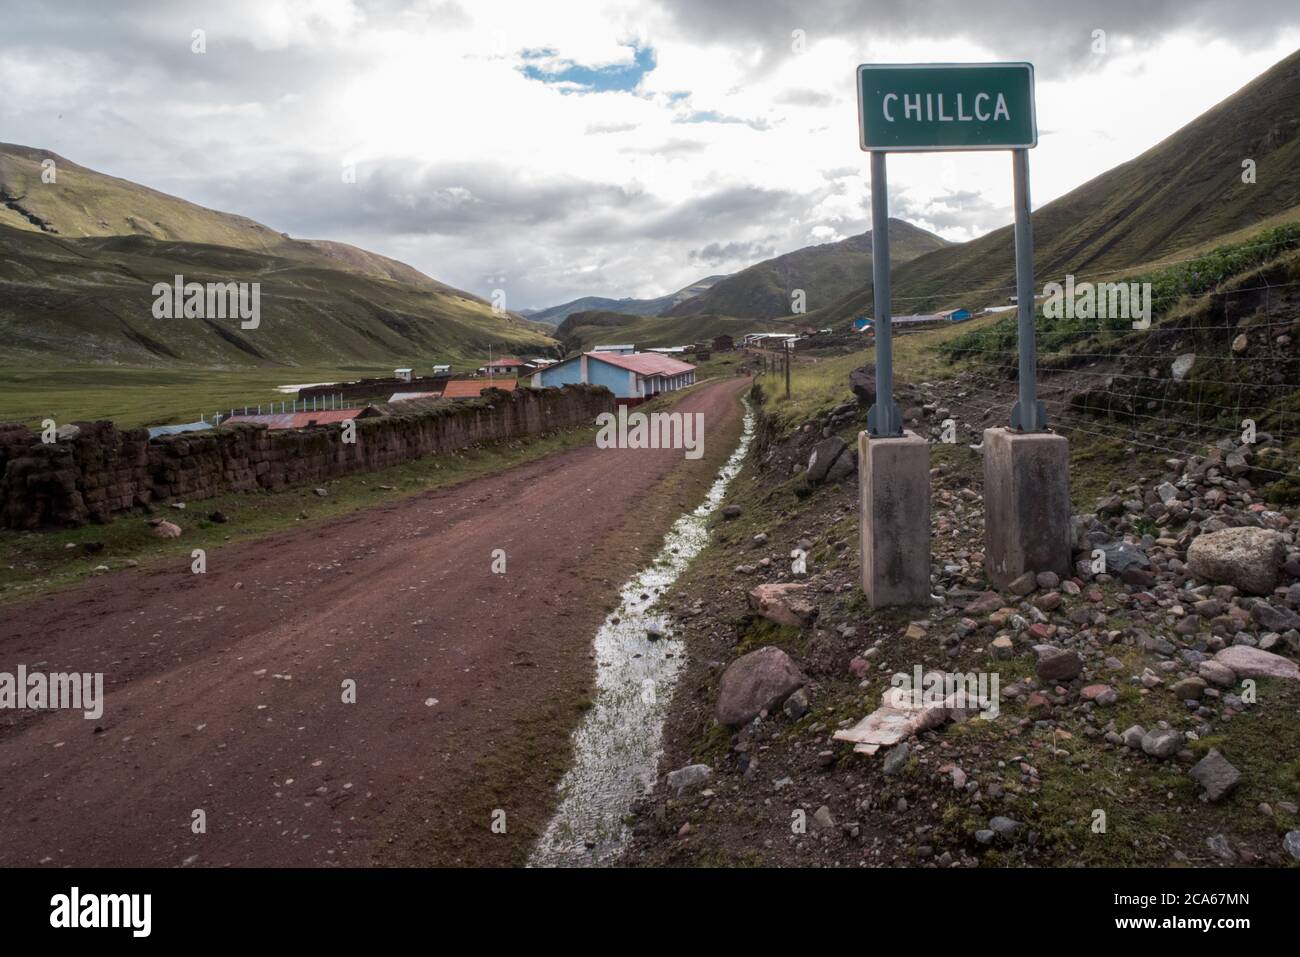 A sign shows the edge of Chillca, a small Andean town nestled in the Andes Mountains of Southern Peru. Stock Photo